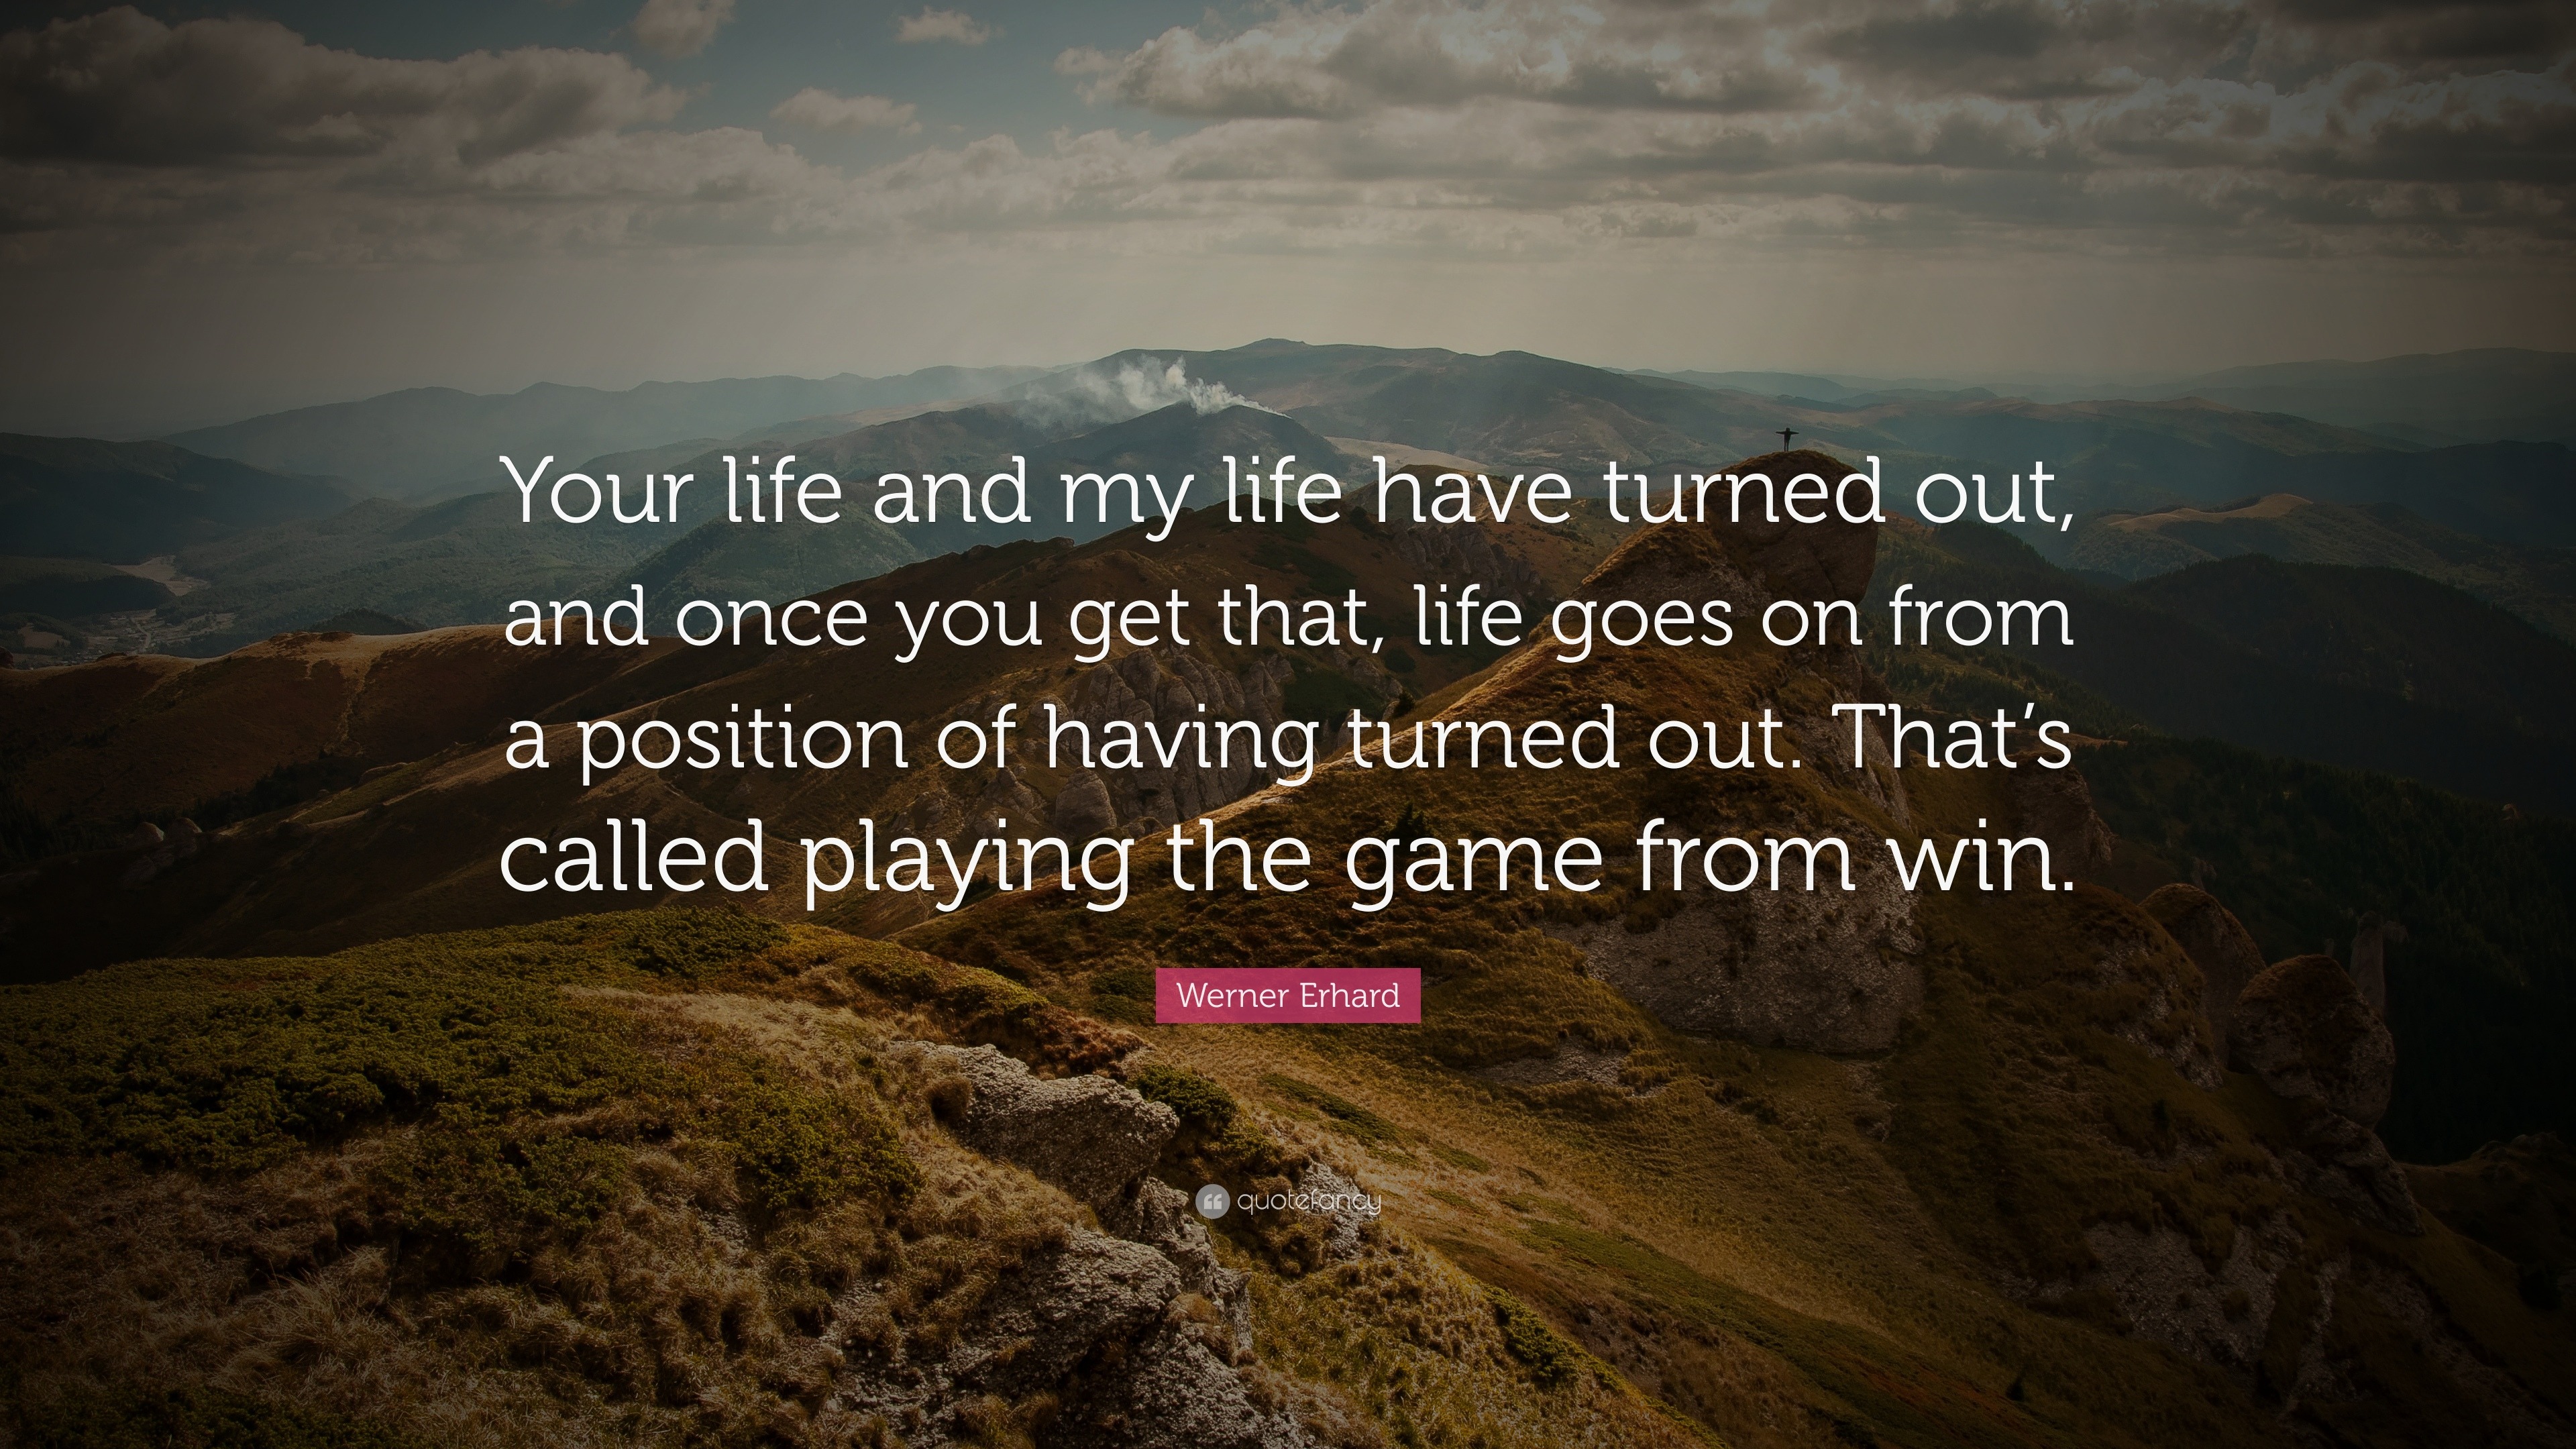 Werner Erhard Quote Your Life And My Life Have Turned Out And Once You Get That Life Goes On From A Position Of Having Turned Out That S 7 Wallpapers Quotefancy